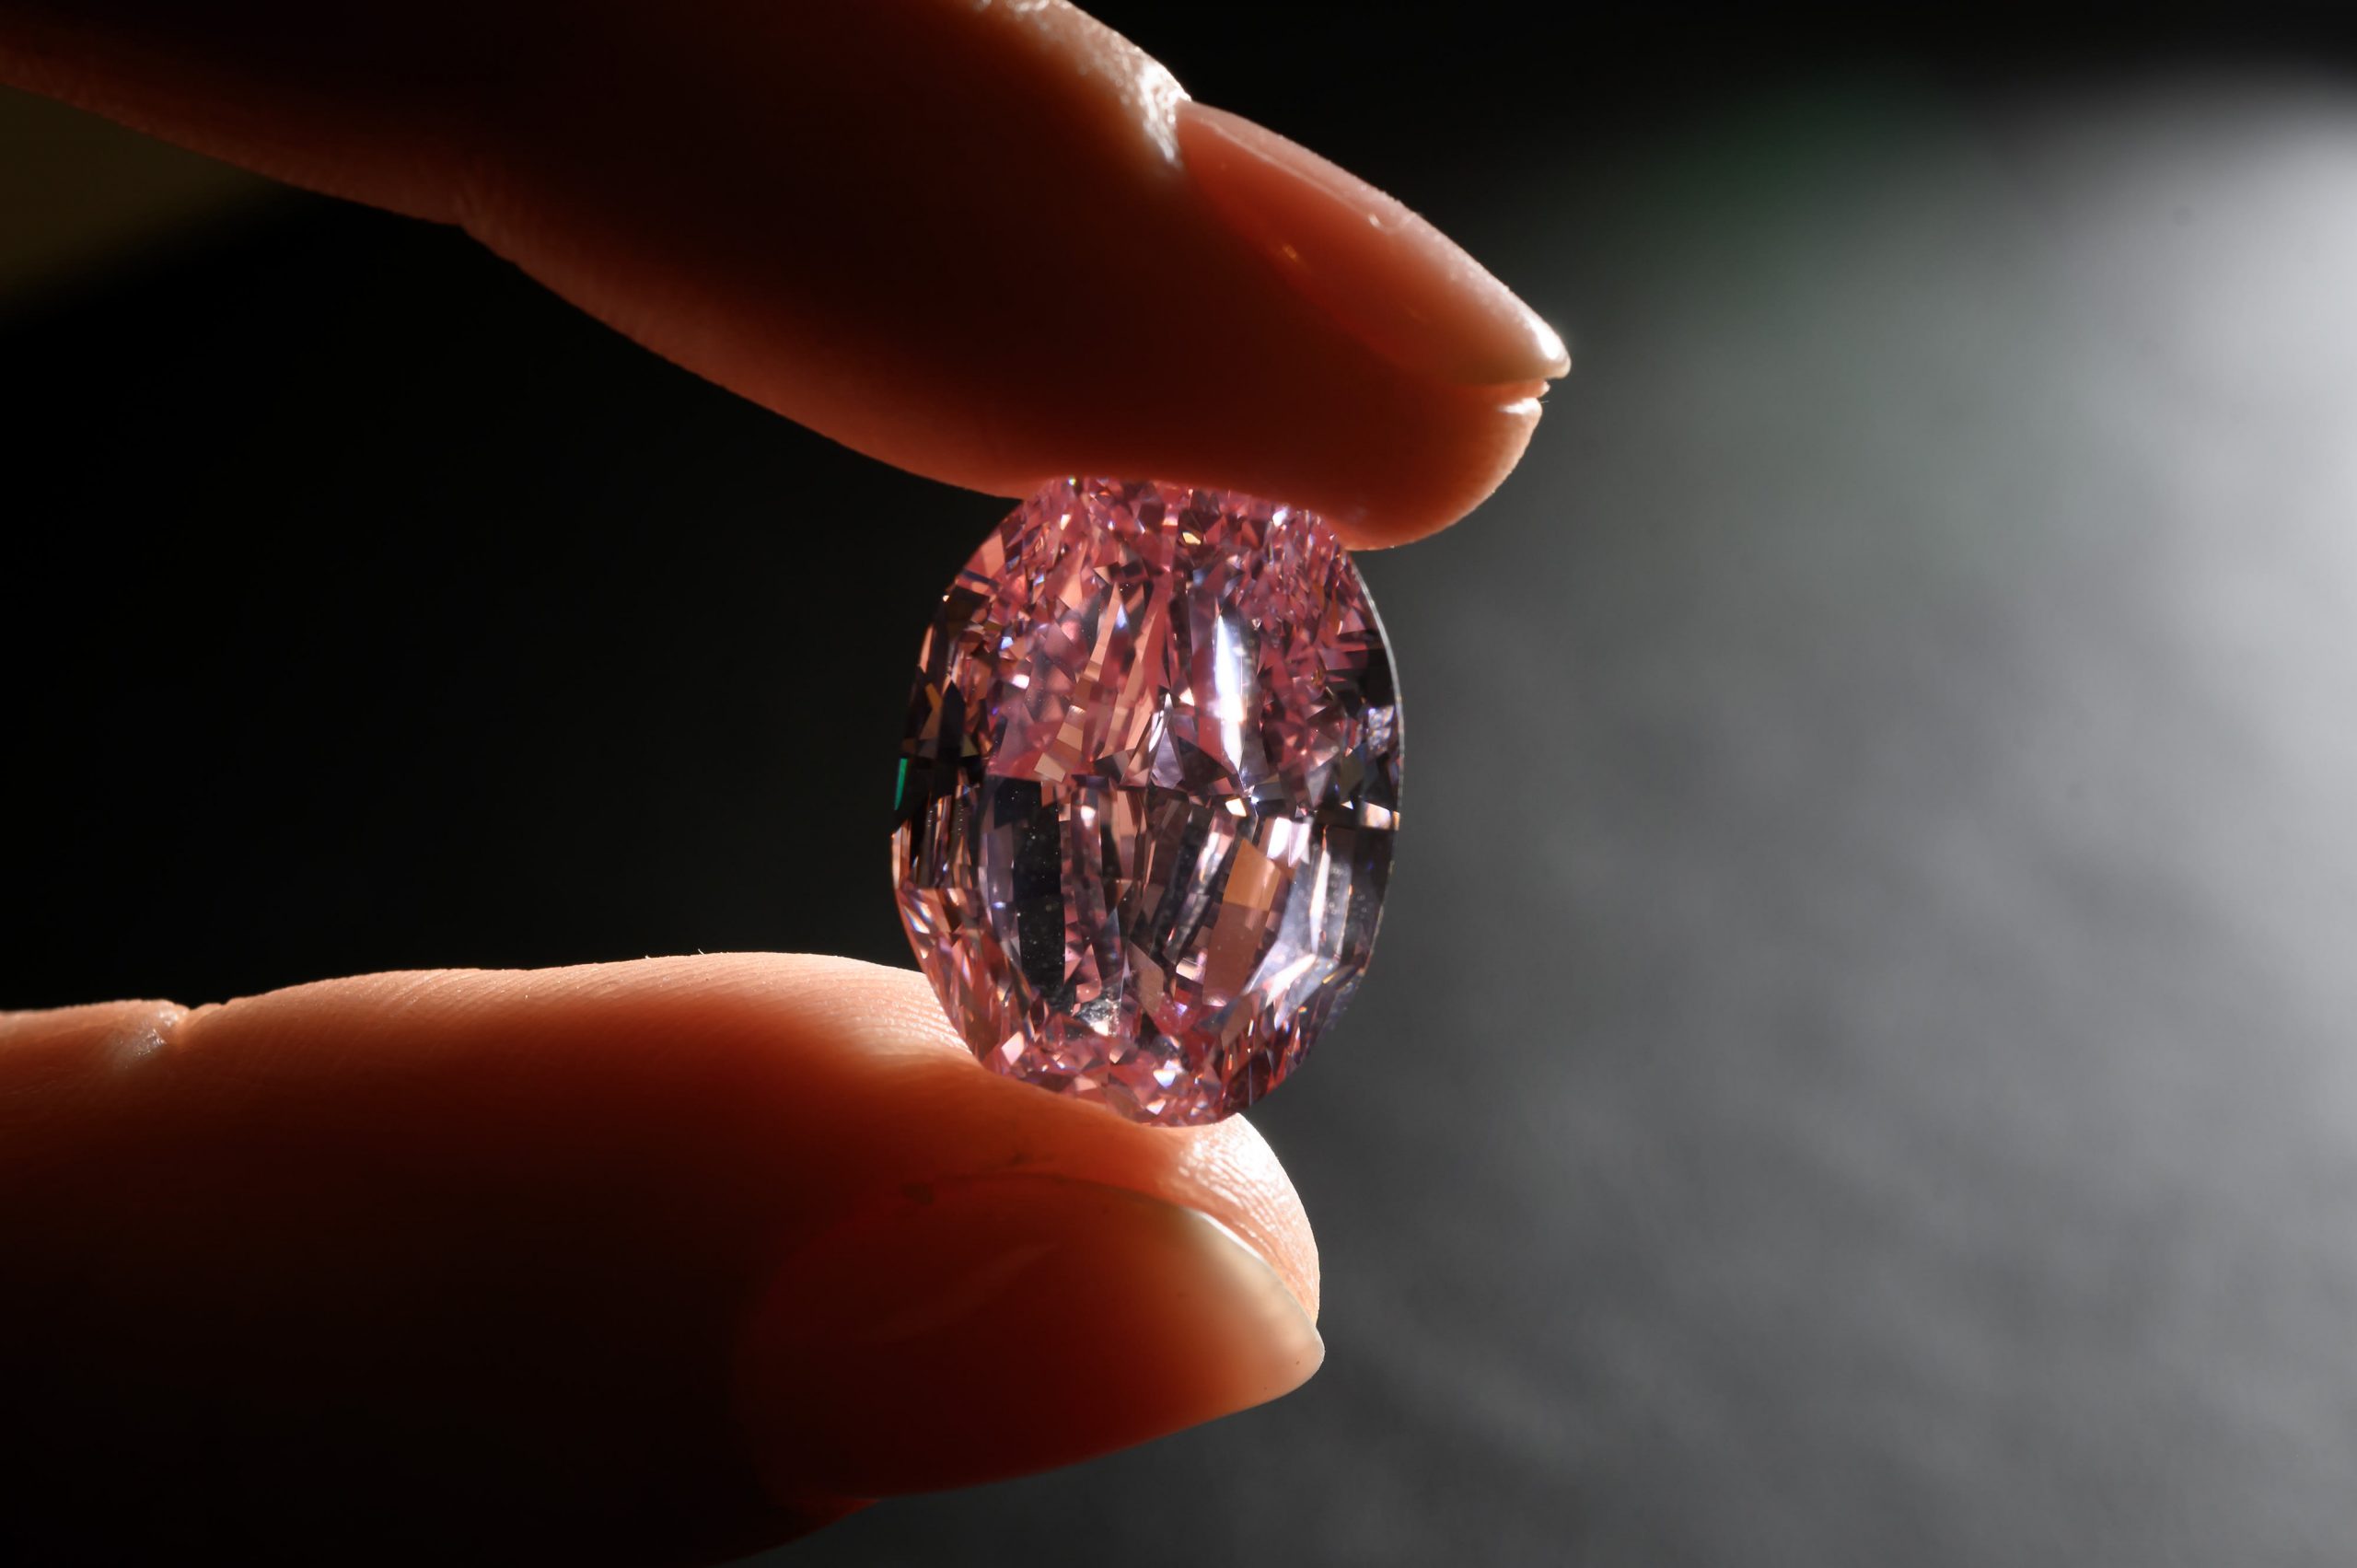 Largest purple-pink diamond ever auctioned sells for $27 million